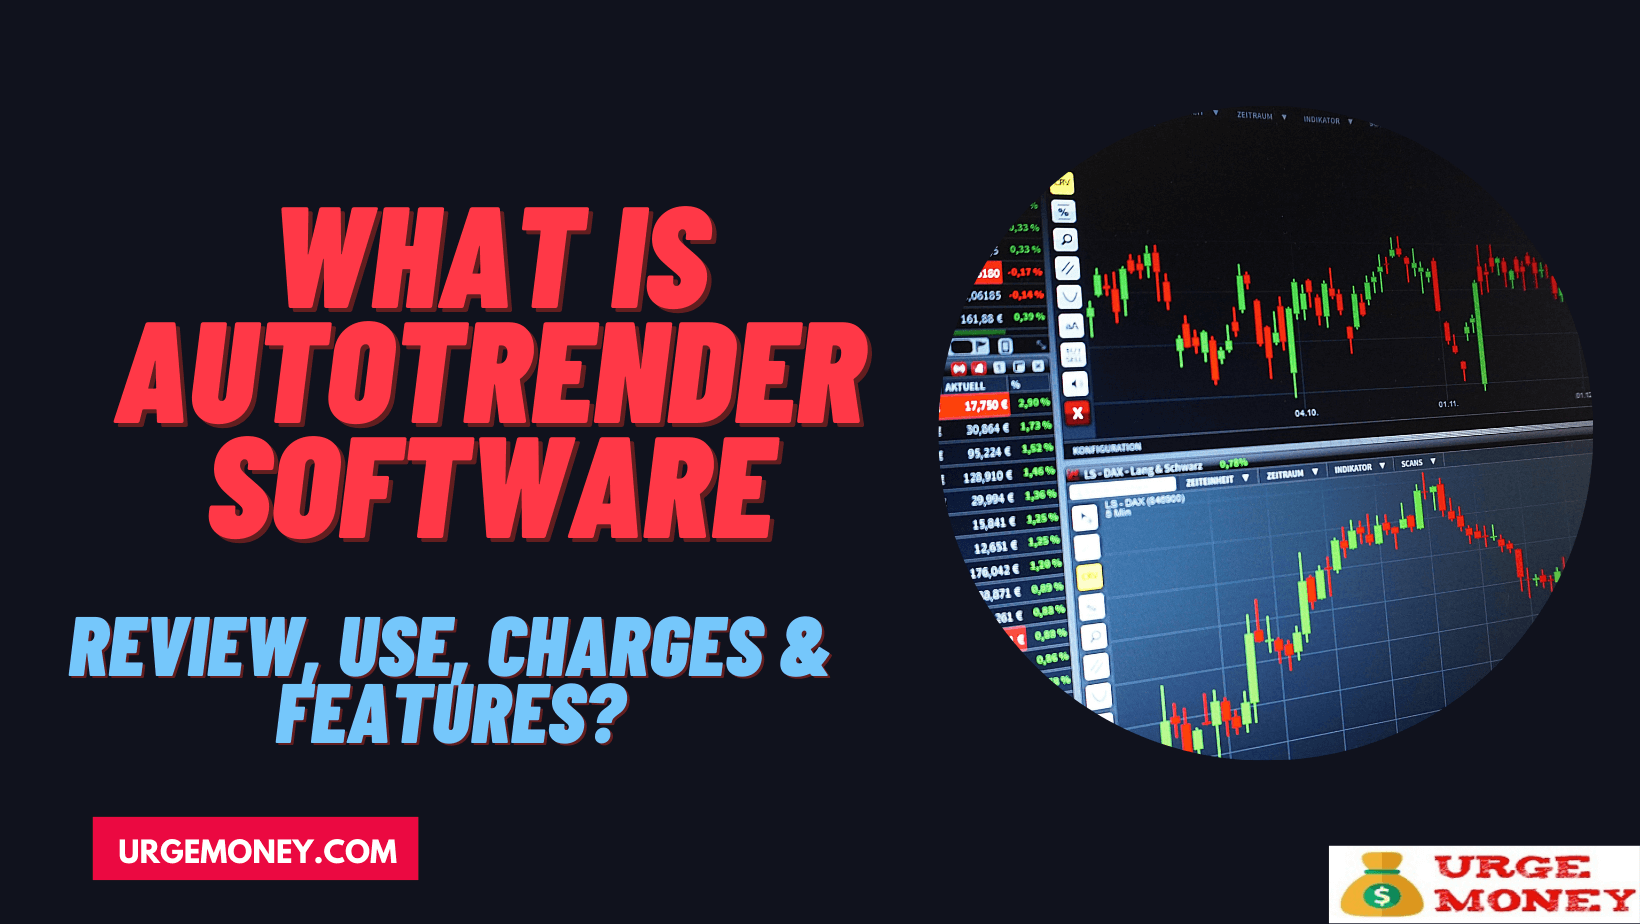 What is Autotrender Software-Review, Use, Charges & Features?